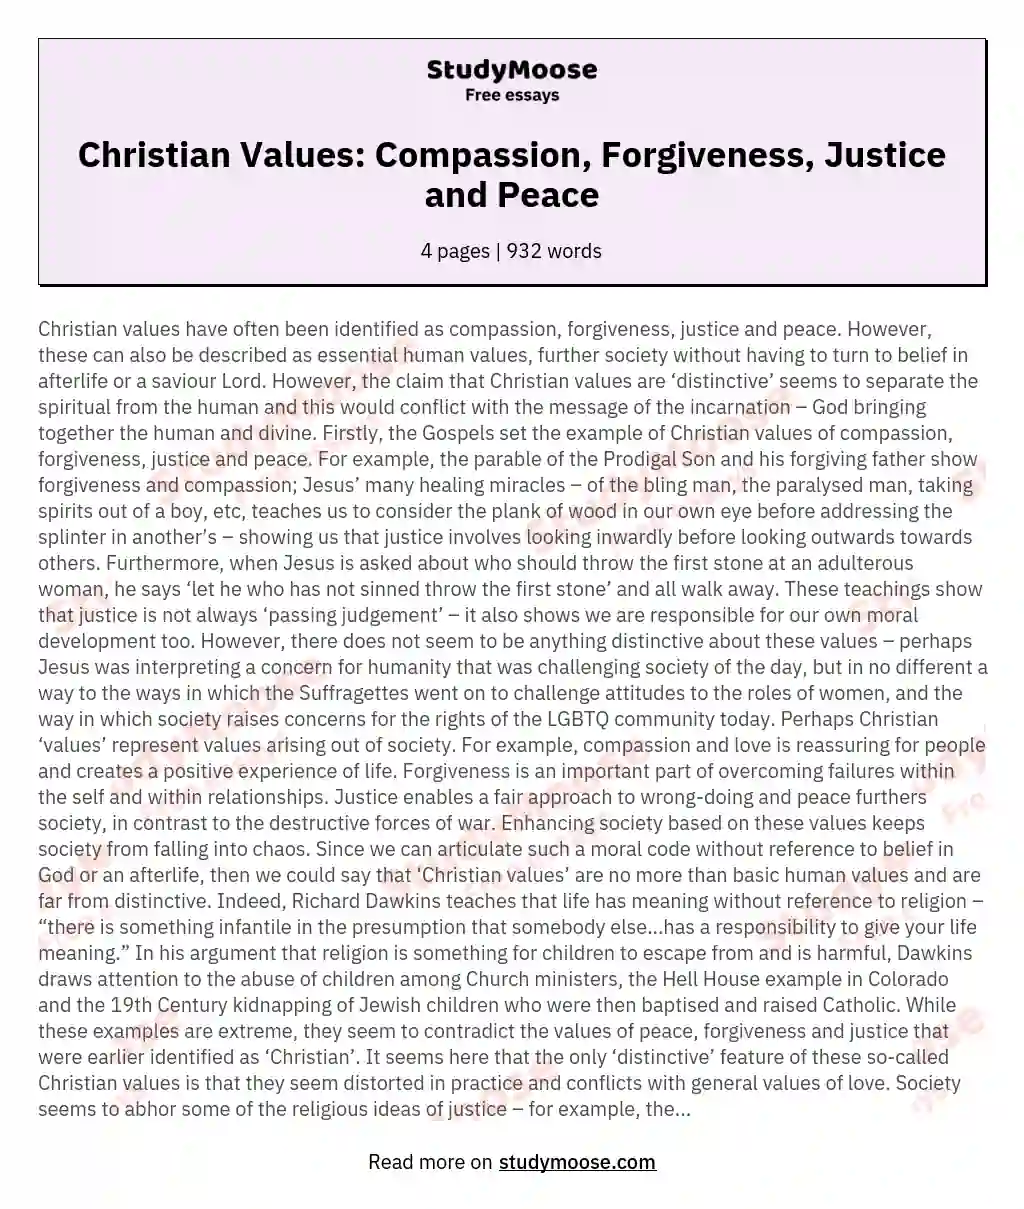 Christian Values: Compassion, Forgiveness, Justice and Peace essay